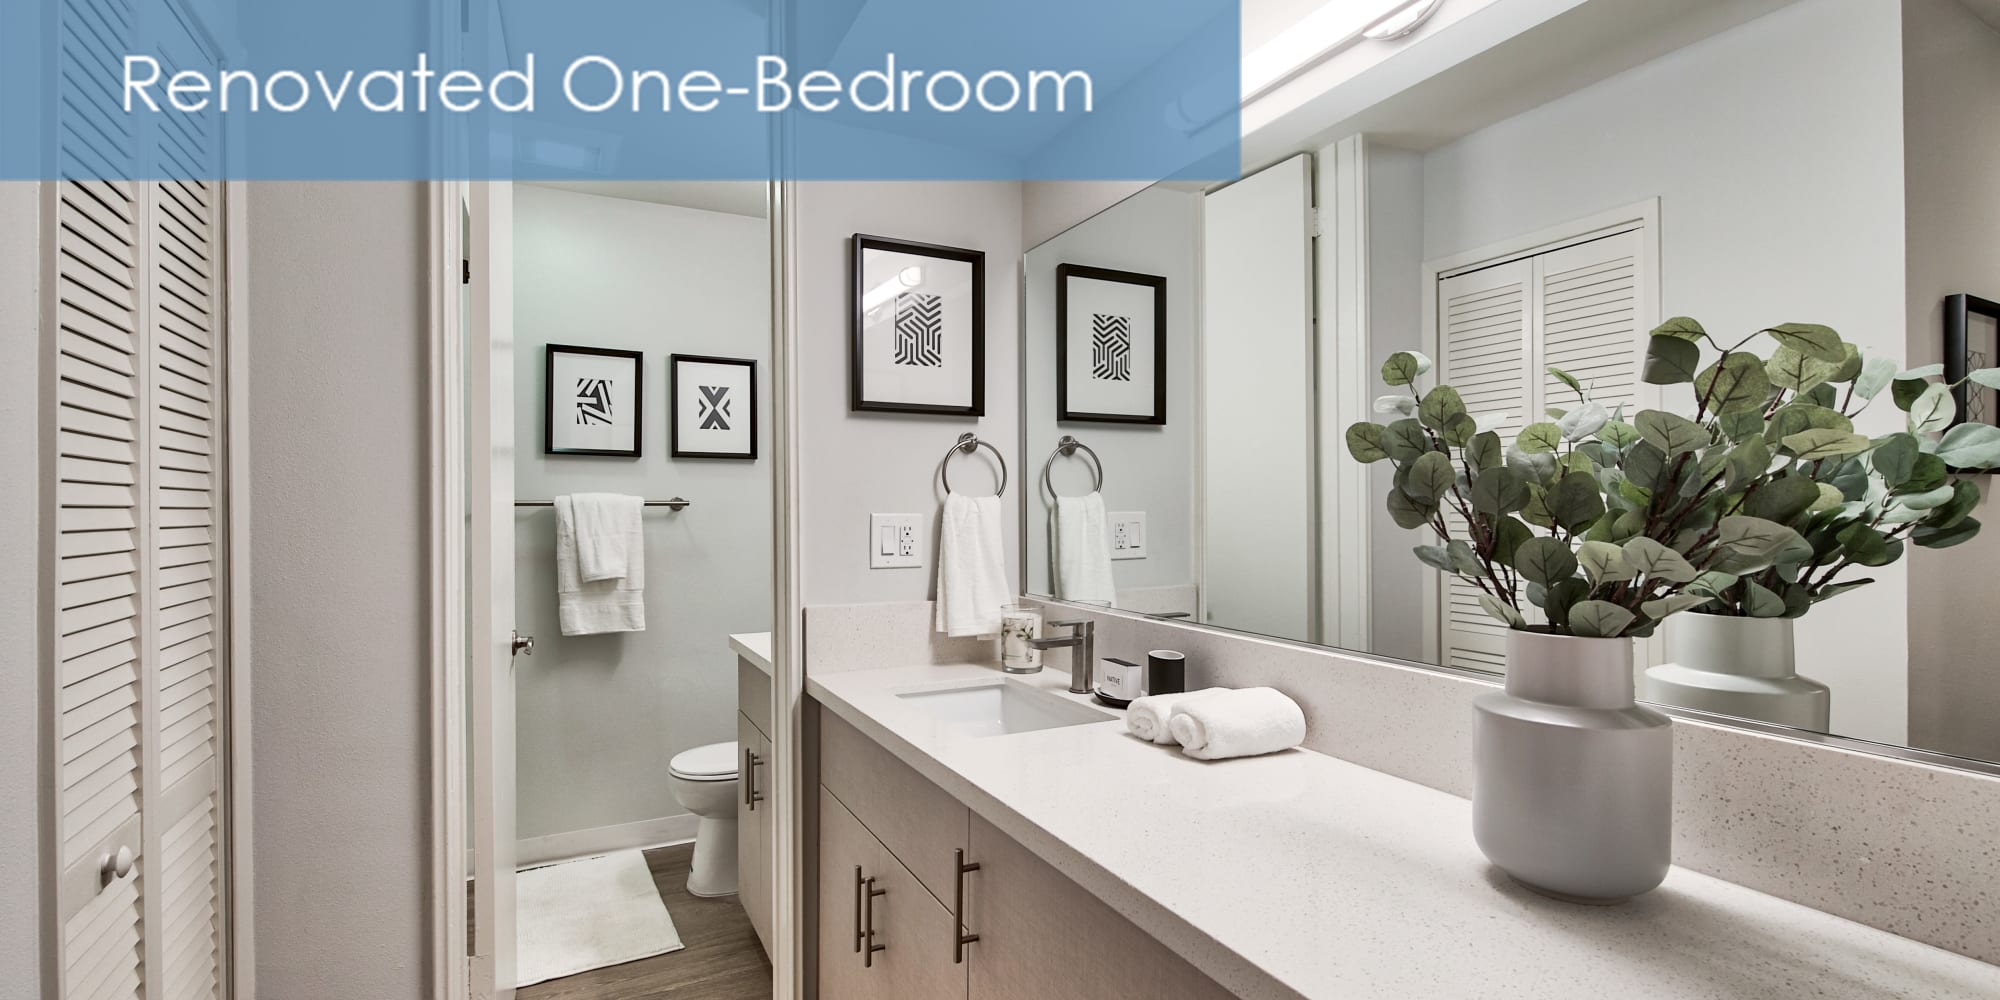 Renovated one-bedroom apartment's bathroom vanity at The Meadows in Culver City, California